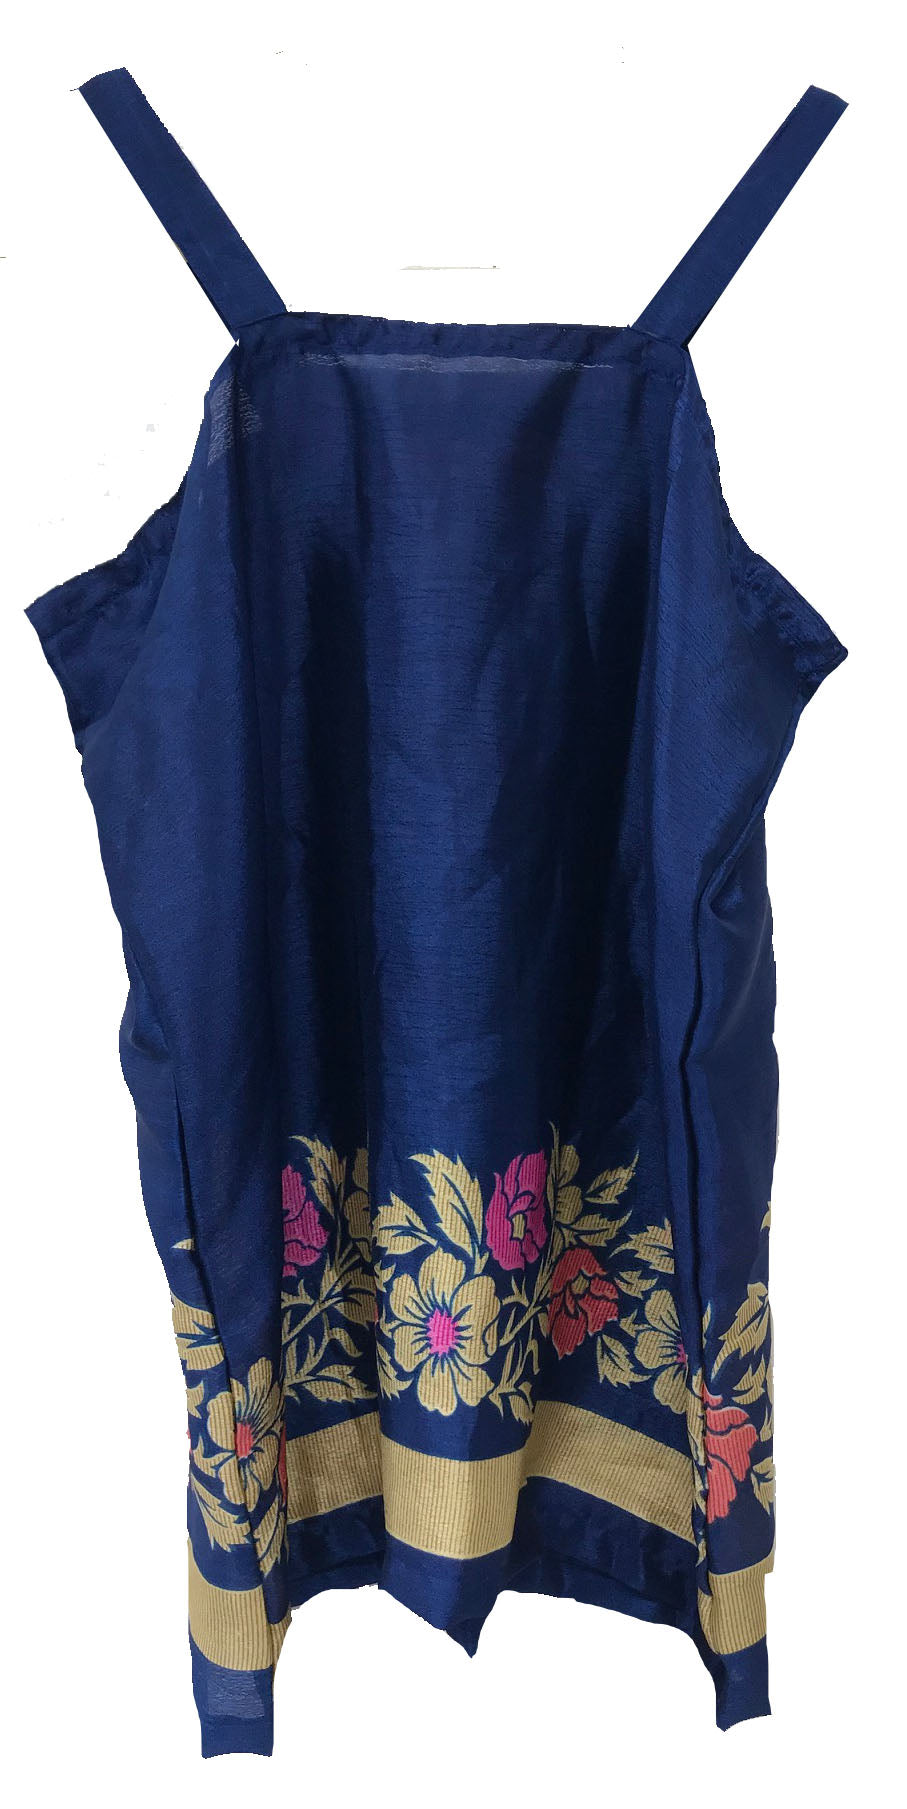 Strap Top in royal blue  colour